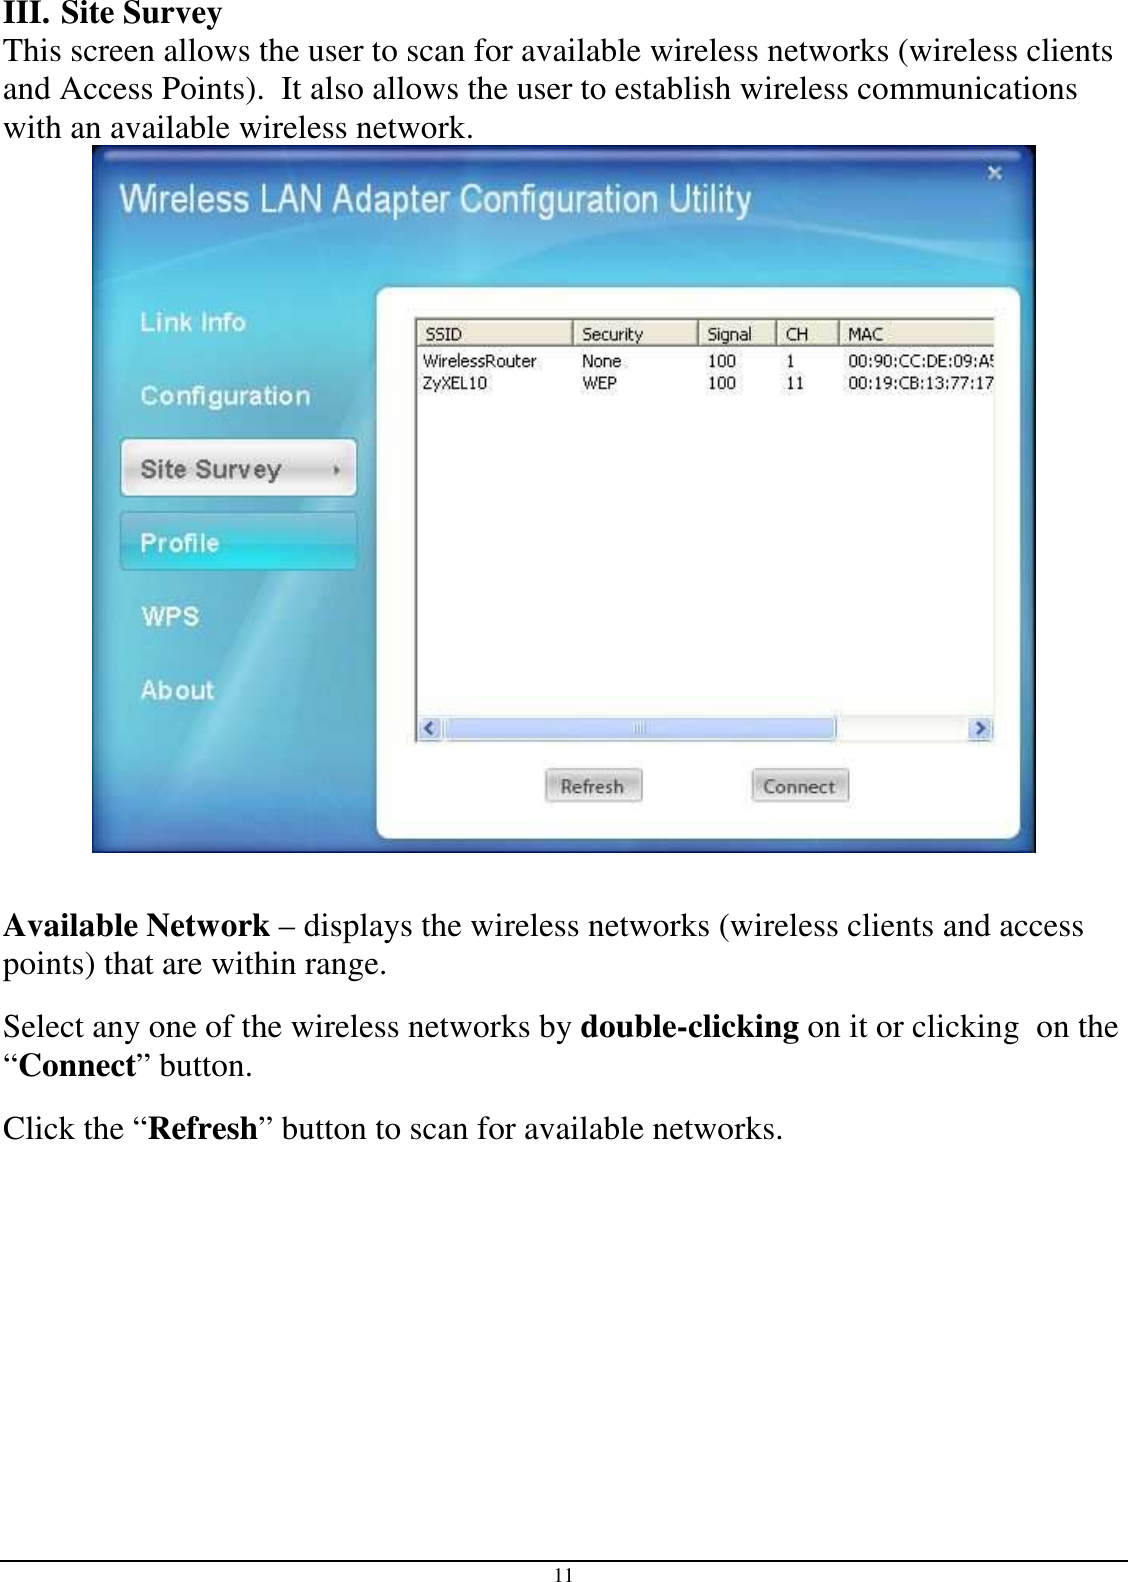 11 III.  Site Survey This screen allows the user to scan for available wireless networks (wireless clients and Access Points).  It also allows the user to establish wireless communications with an available wireless network.   Available Network – displays the wireless networks (wireless clients and access points) that are within range.  Select any one of the wireless networks by double-clicking on it or clicking  on the “Connect” button. Click the “Refresh” button to scan for available networks.       